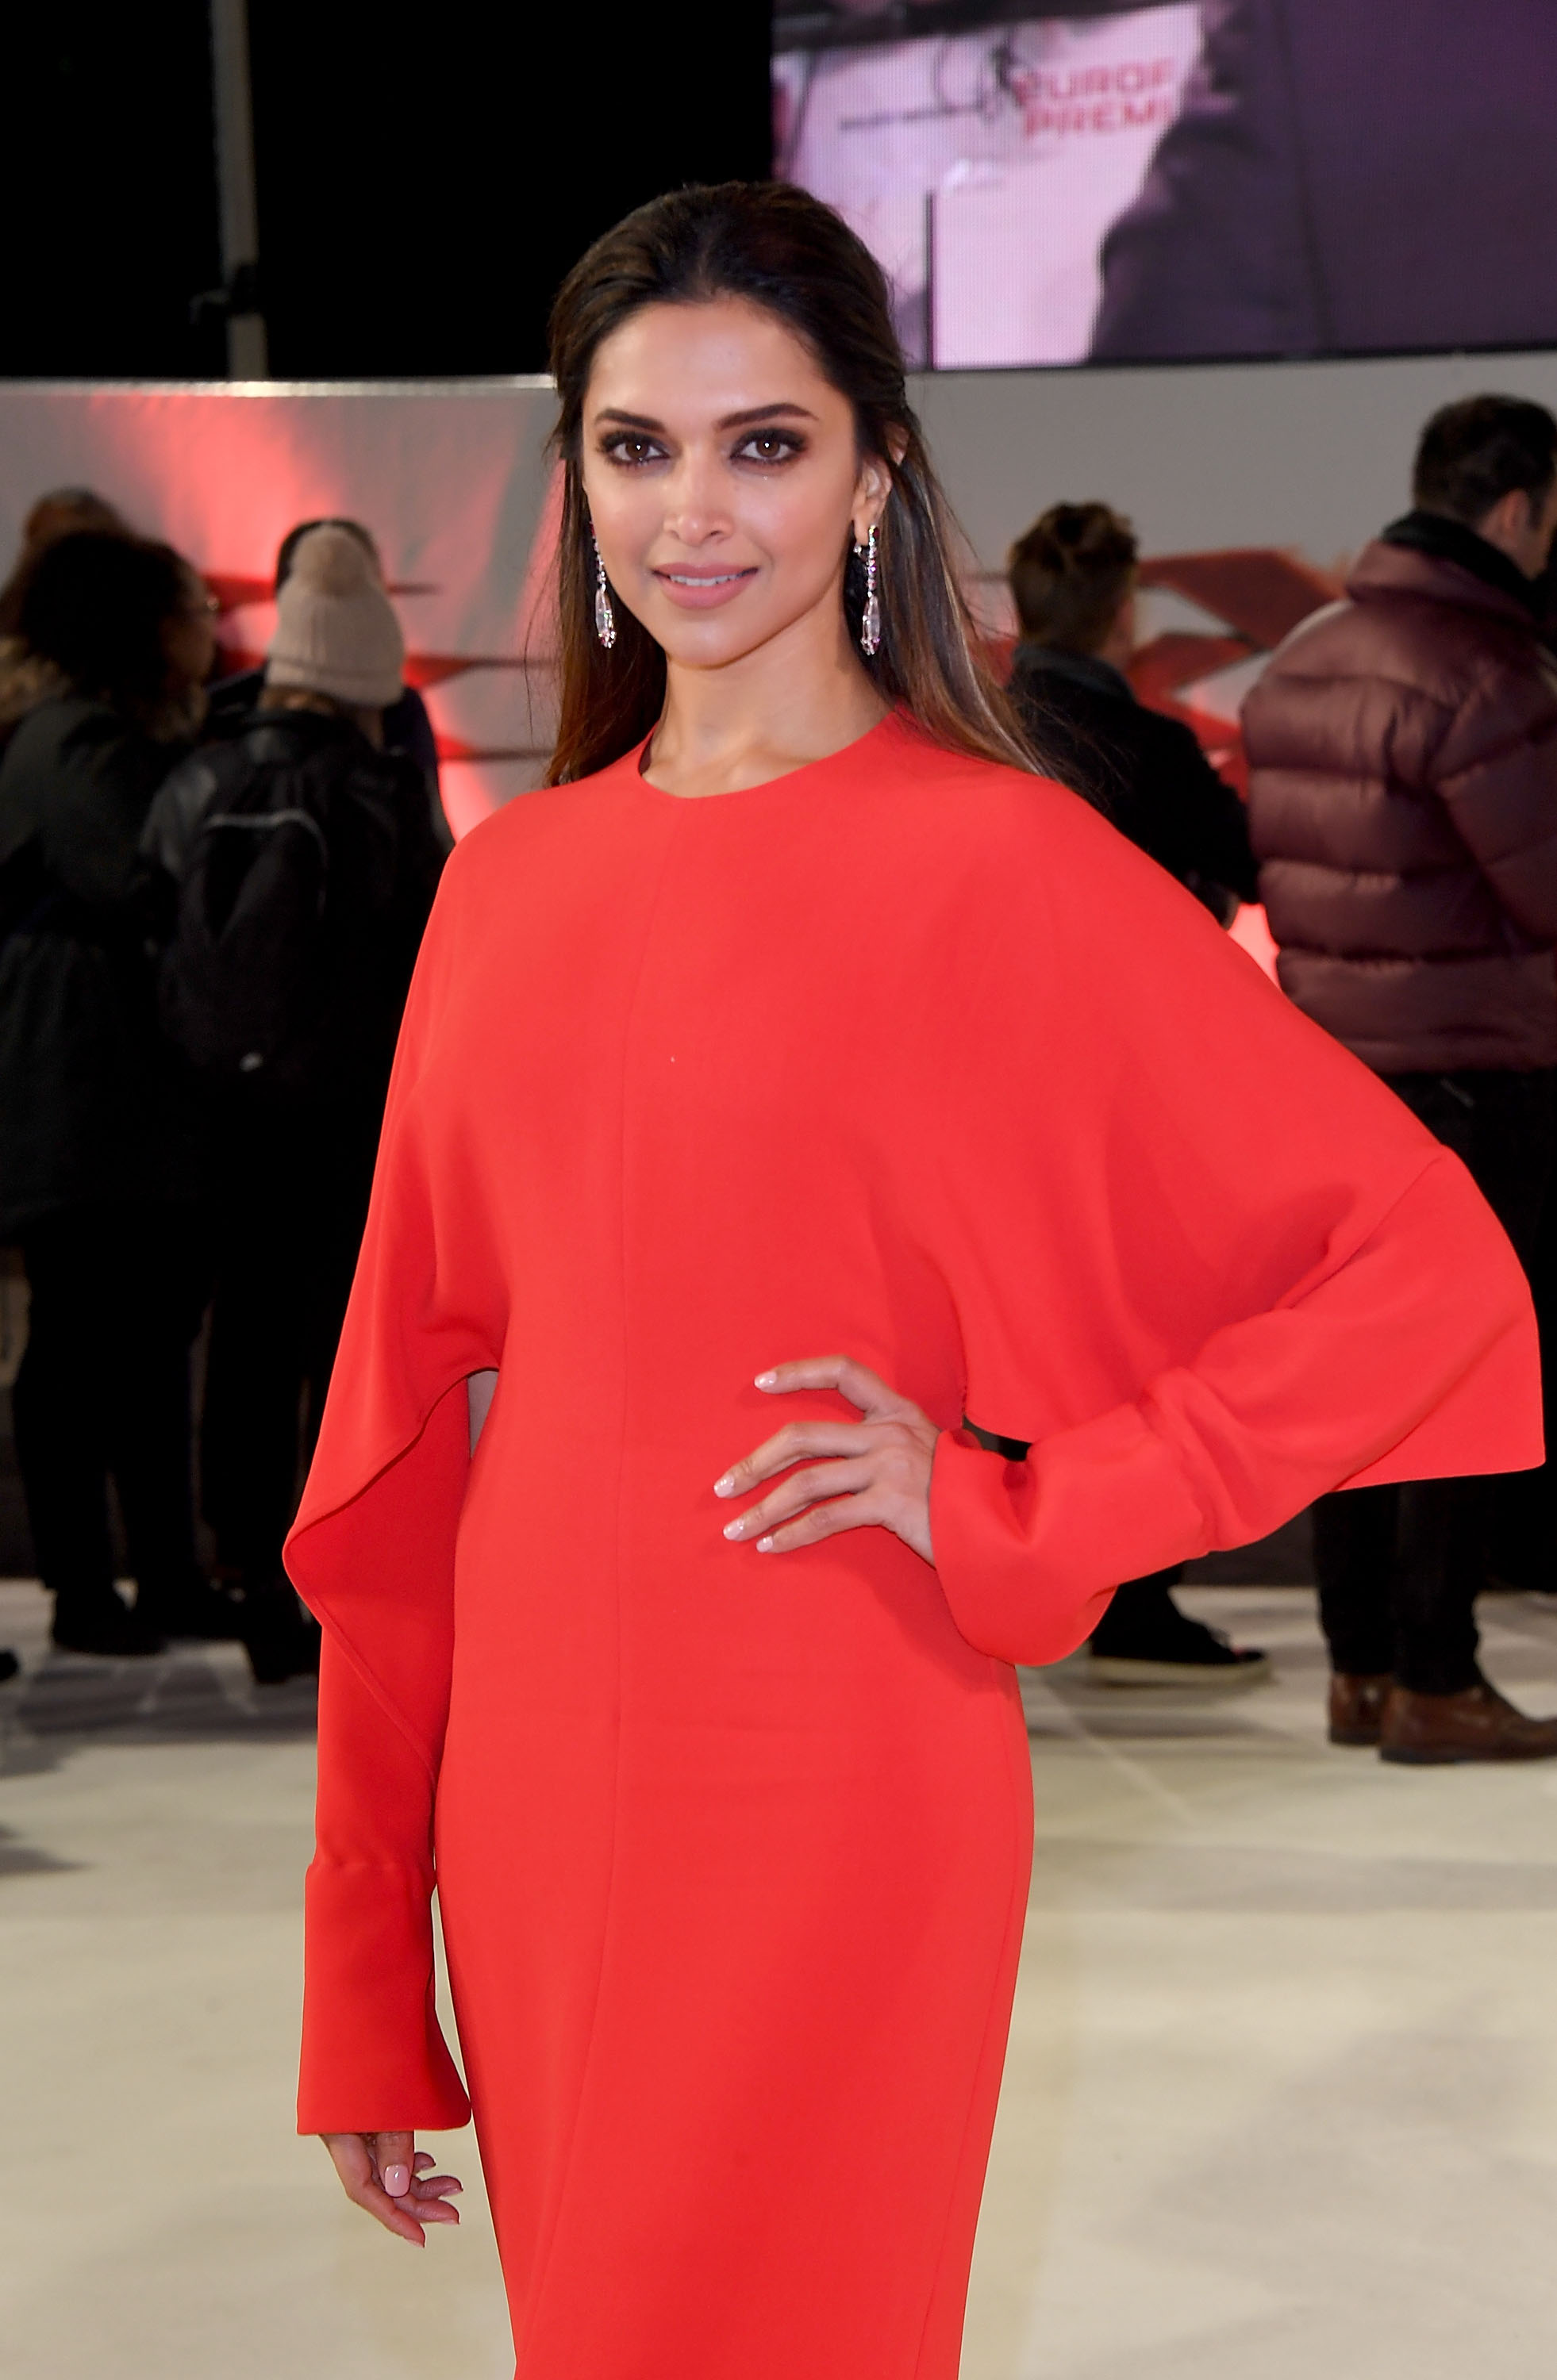 LONDON, ENGLAND - JANUARY 10: Deepika Padukone attends the European Premiere of Paramount Pictures' 